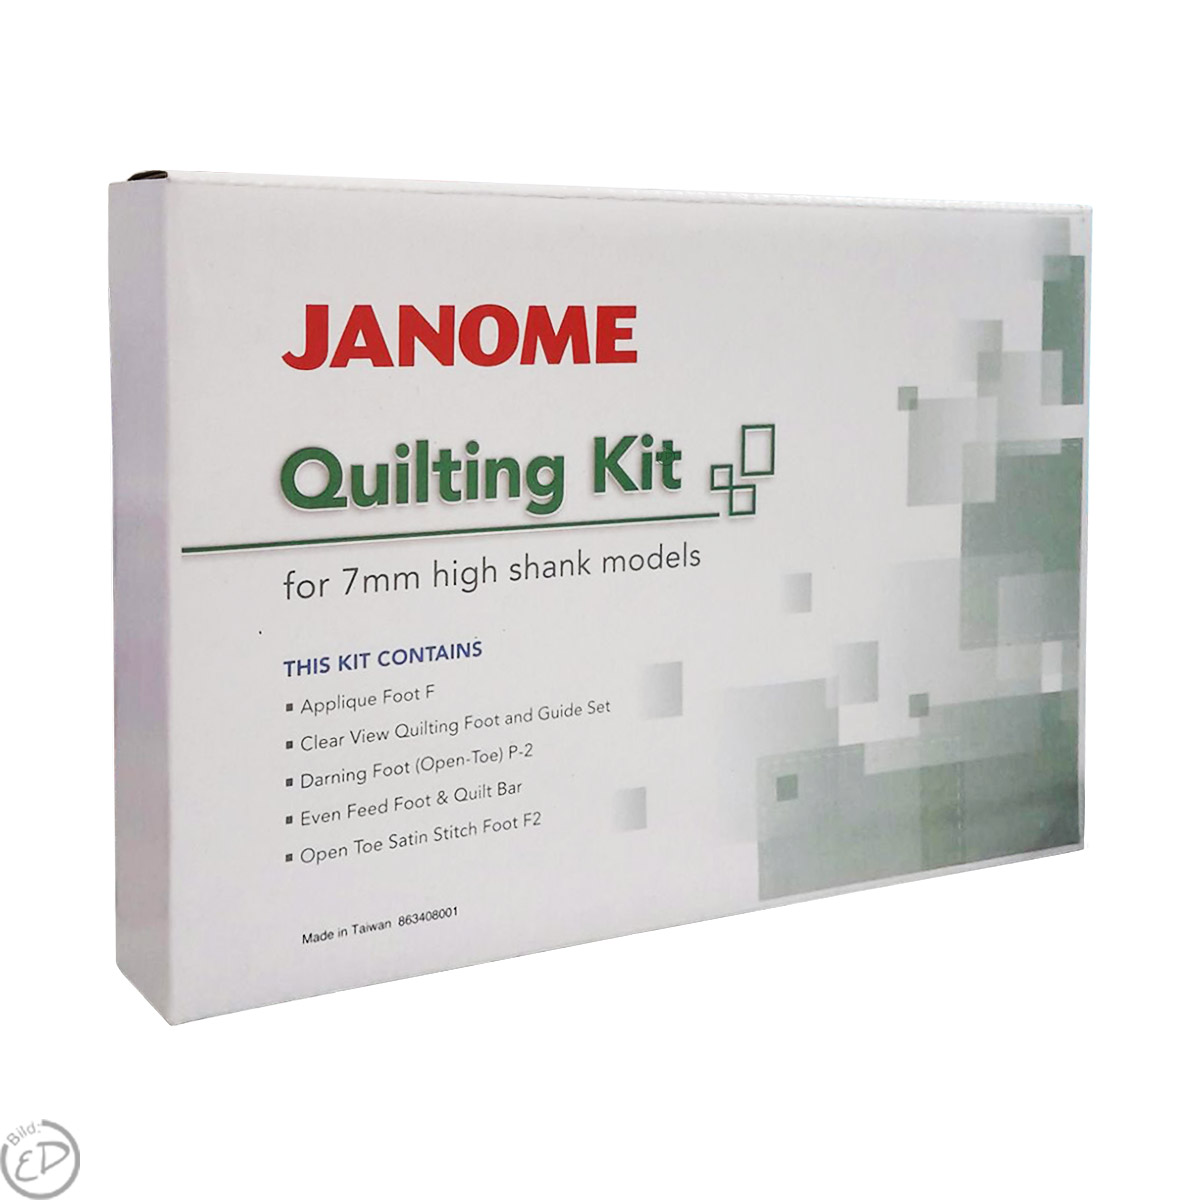 JANOME Quilting Kit 7mm